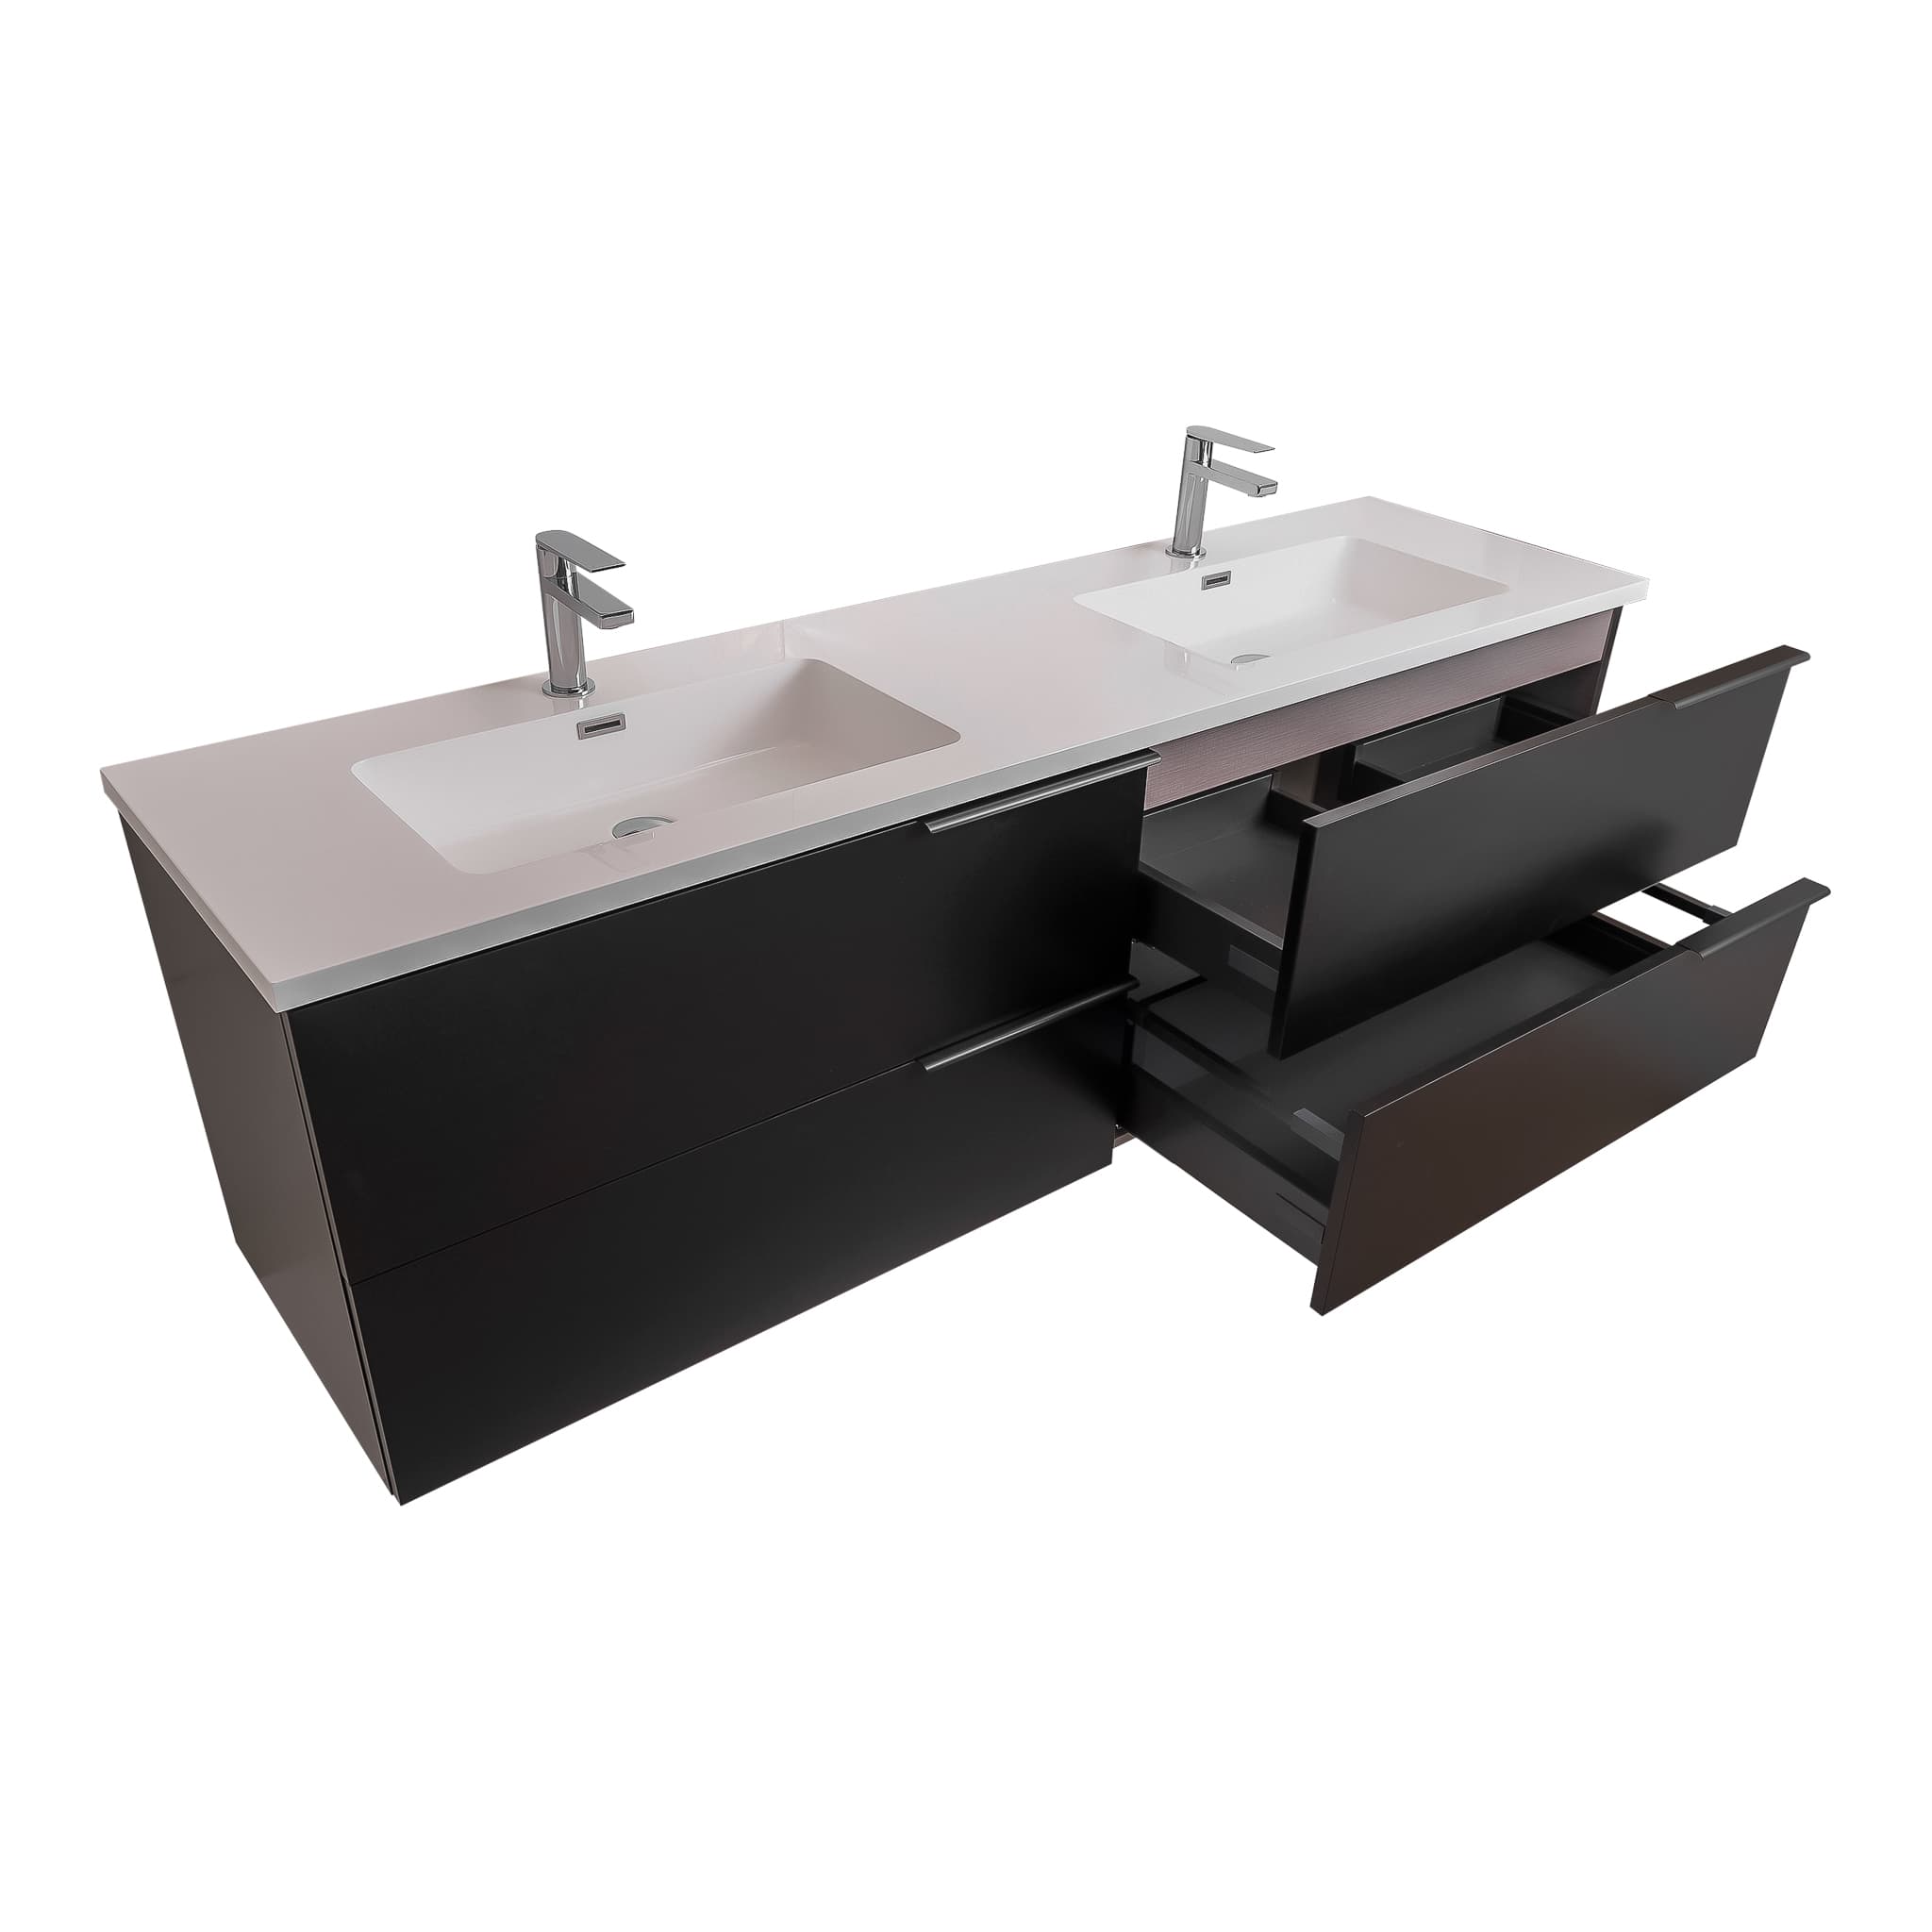 Mallorca 63 Matte Black Cabinet, Square Cultured Marble Double Sink, Wall Mounted Modern Vanity Set